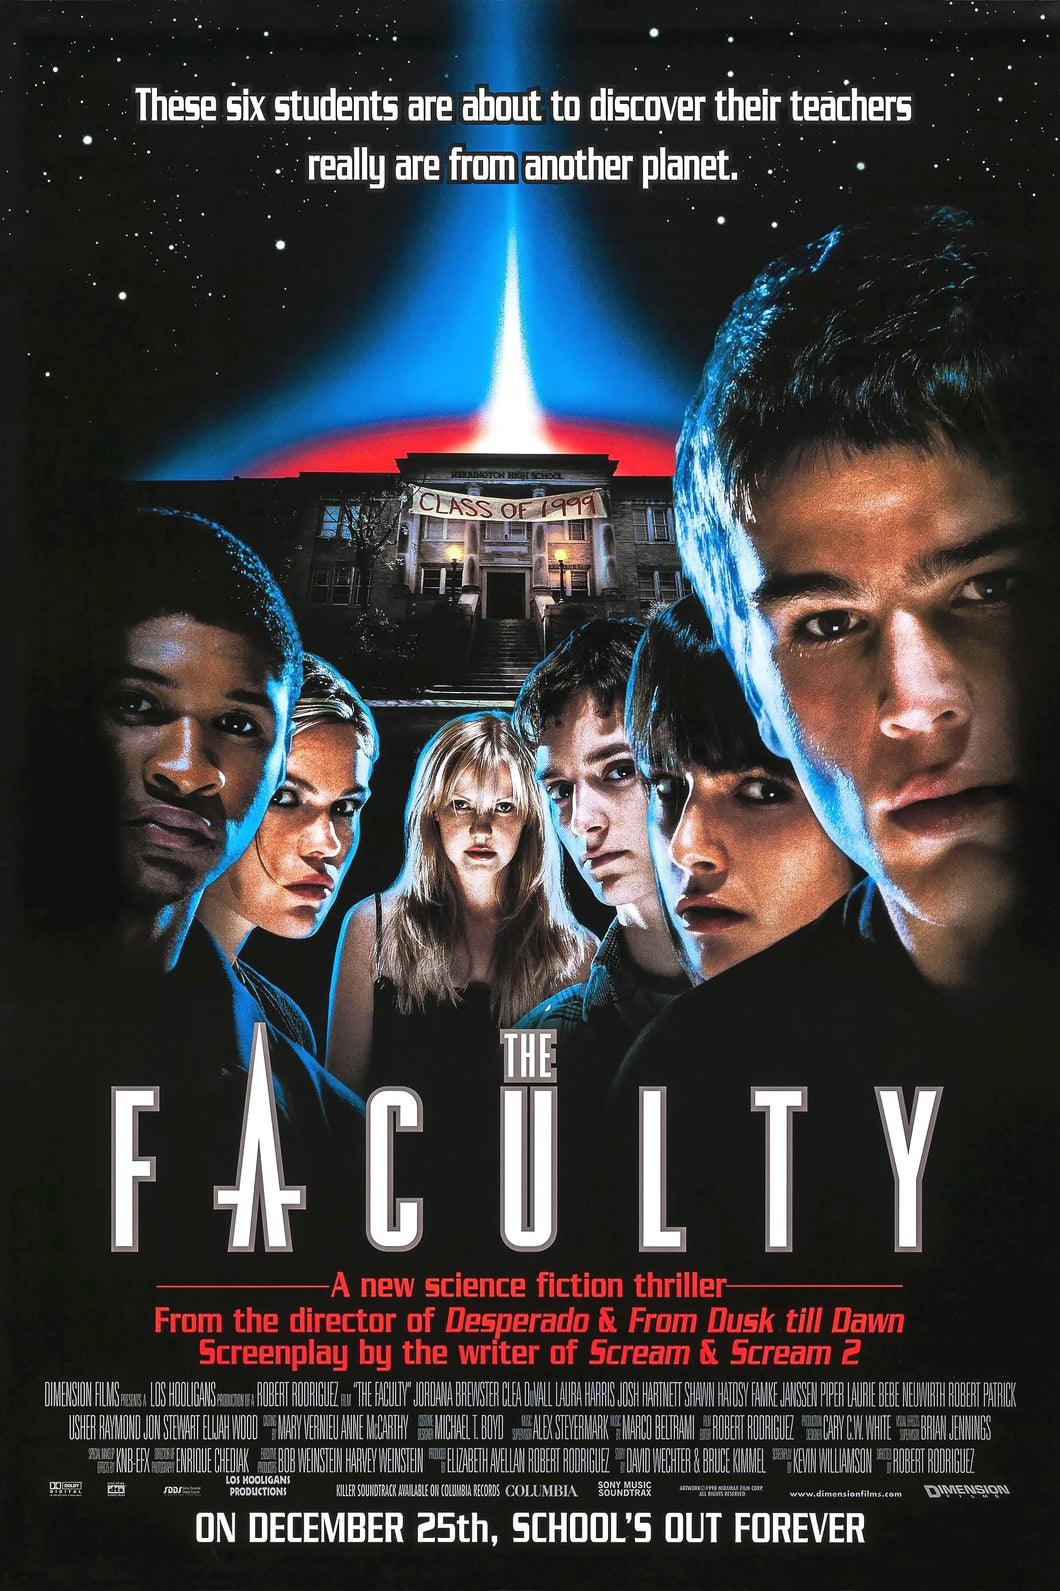 The Faculty (1998) Movie Poster High Quality Glossy Paper A1 A2 A3 A4 A3 Framed or Unframed!!!